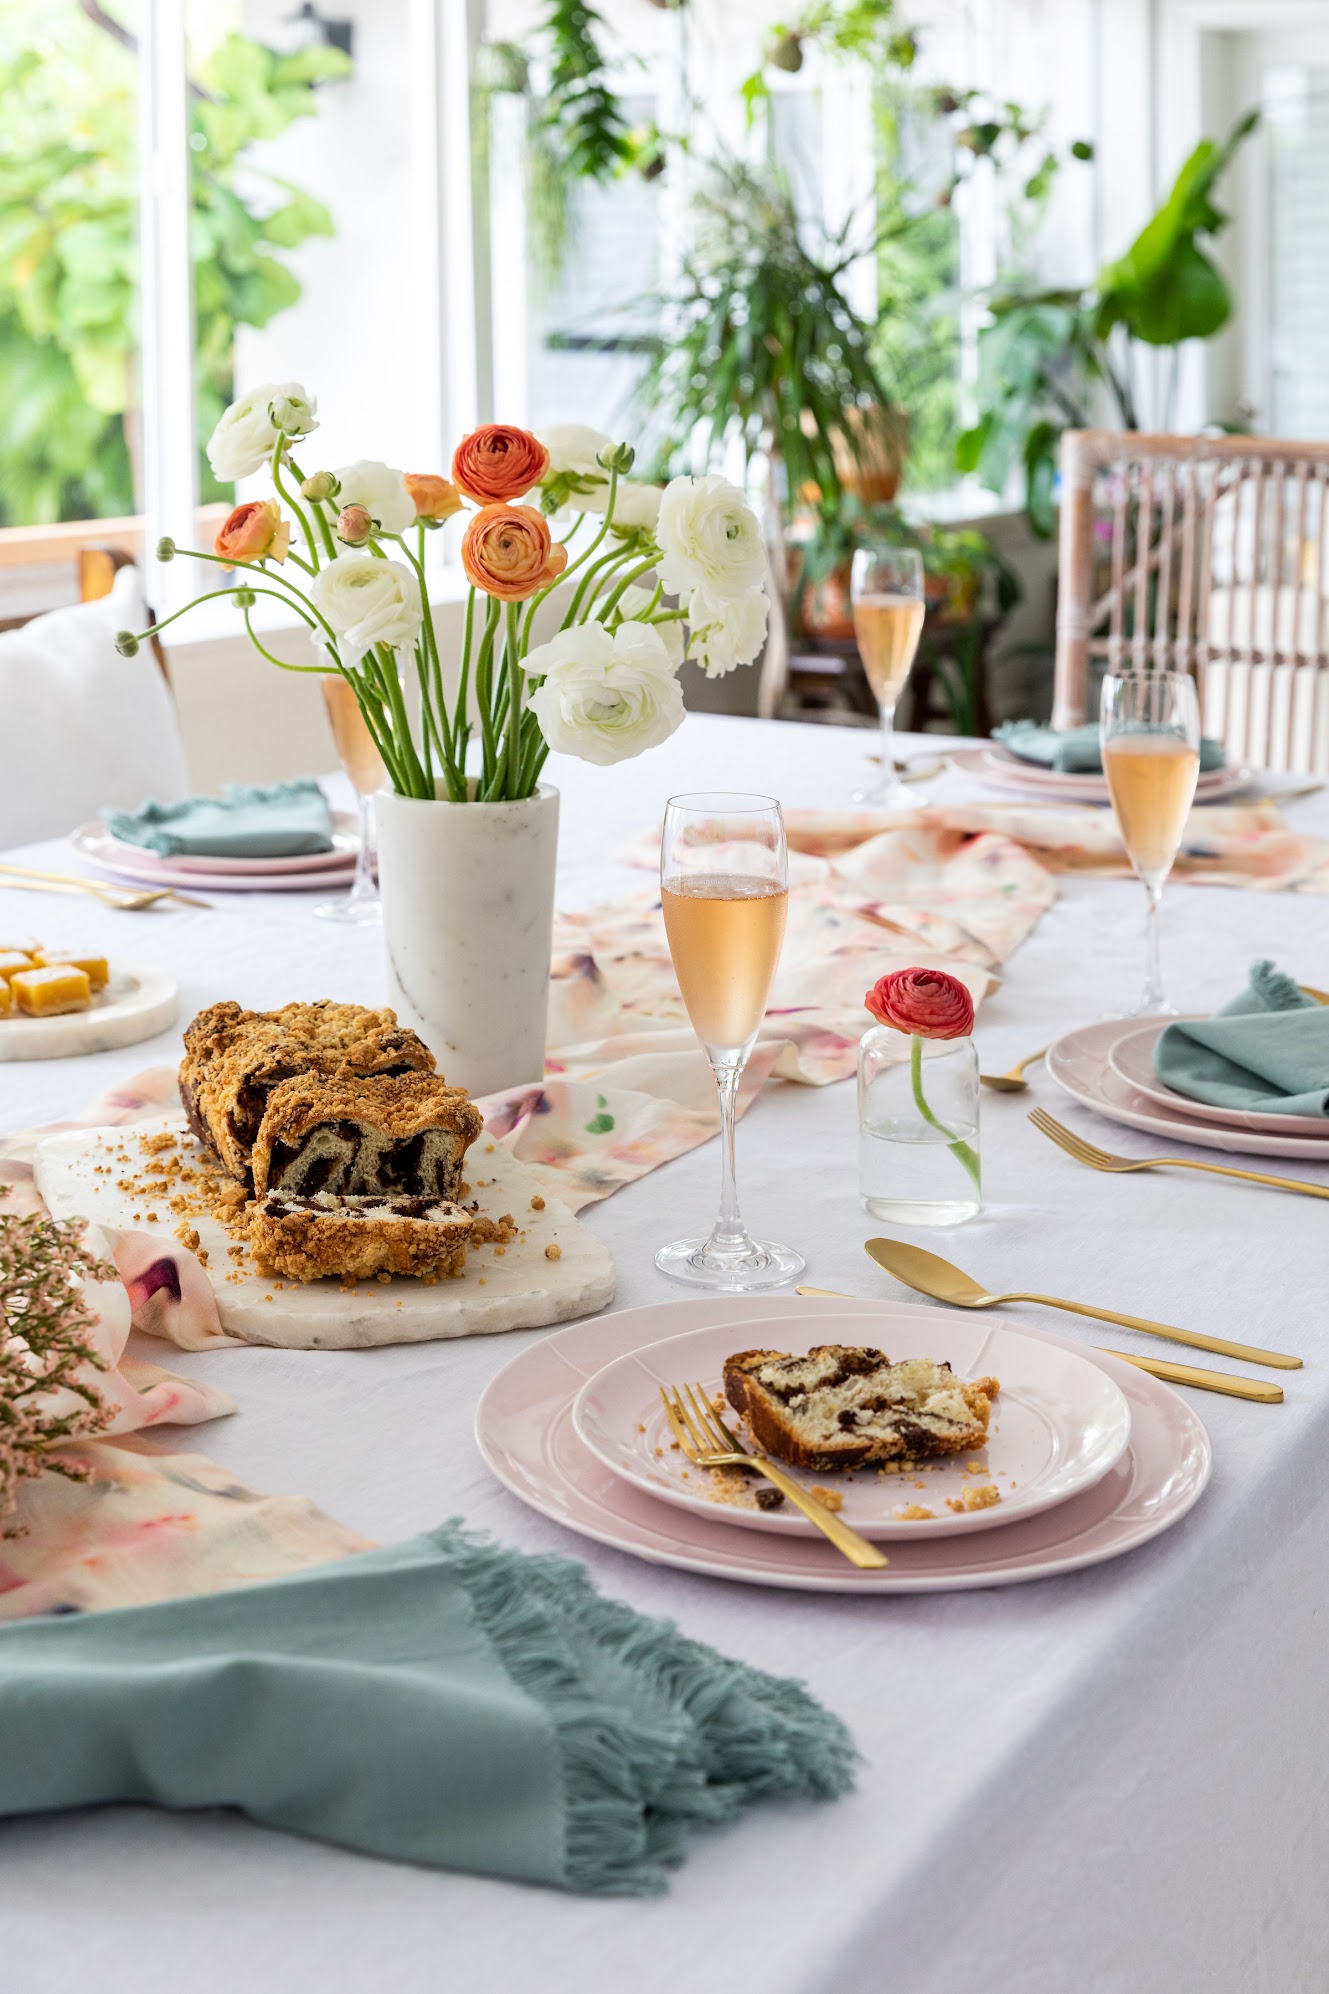 The perfect Mother’s Day brunch inspiration that will make her happy!